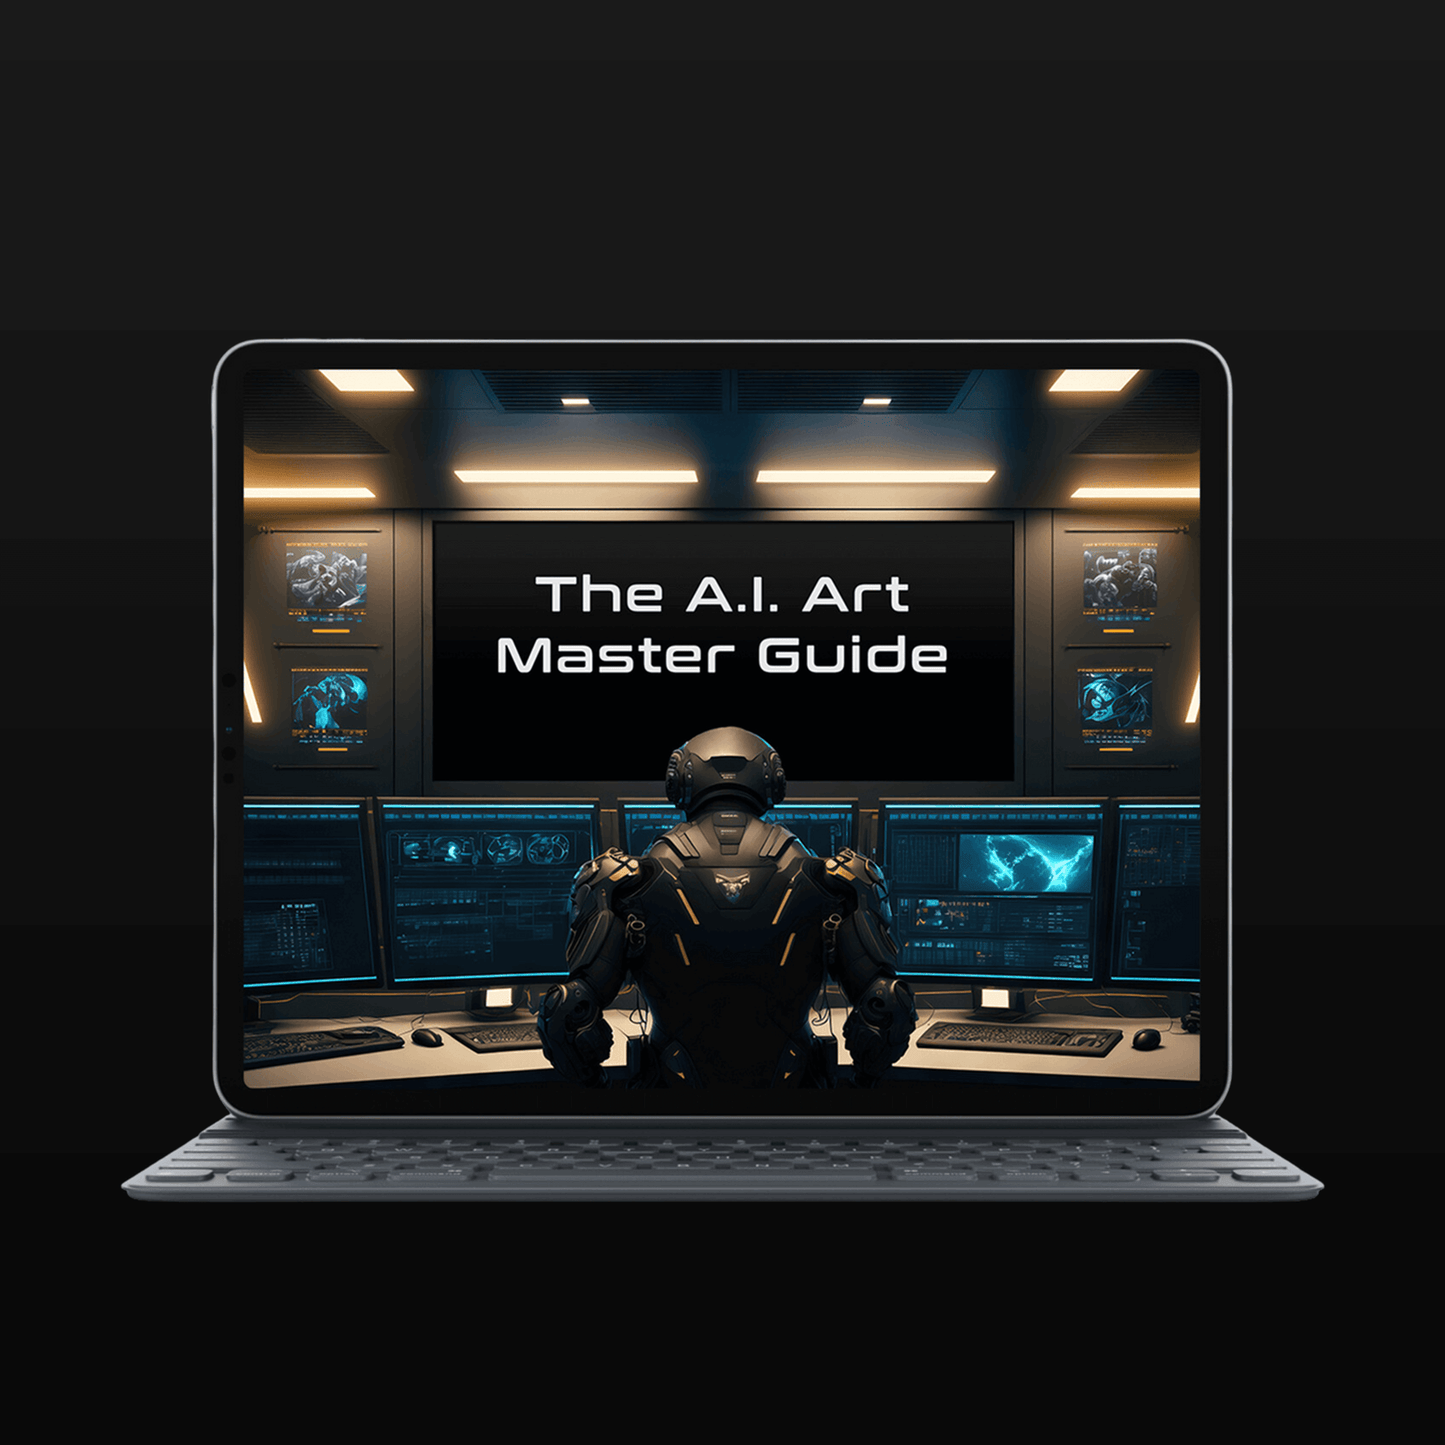 The A.I. Art Master Guide